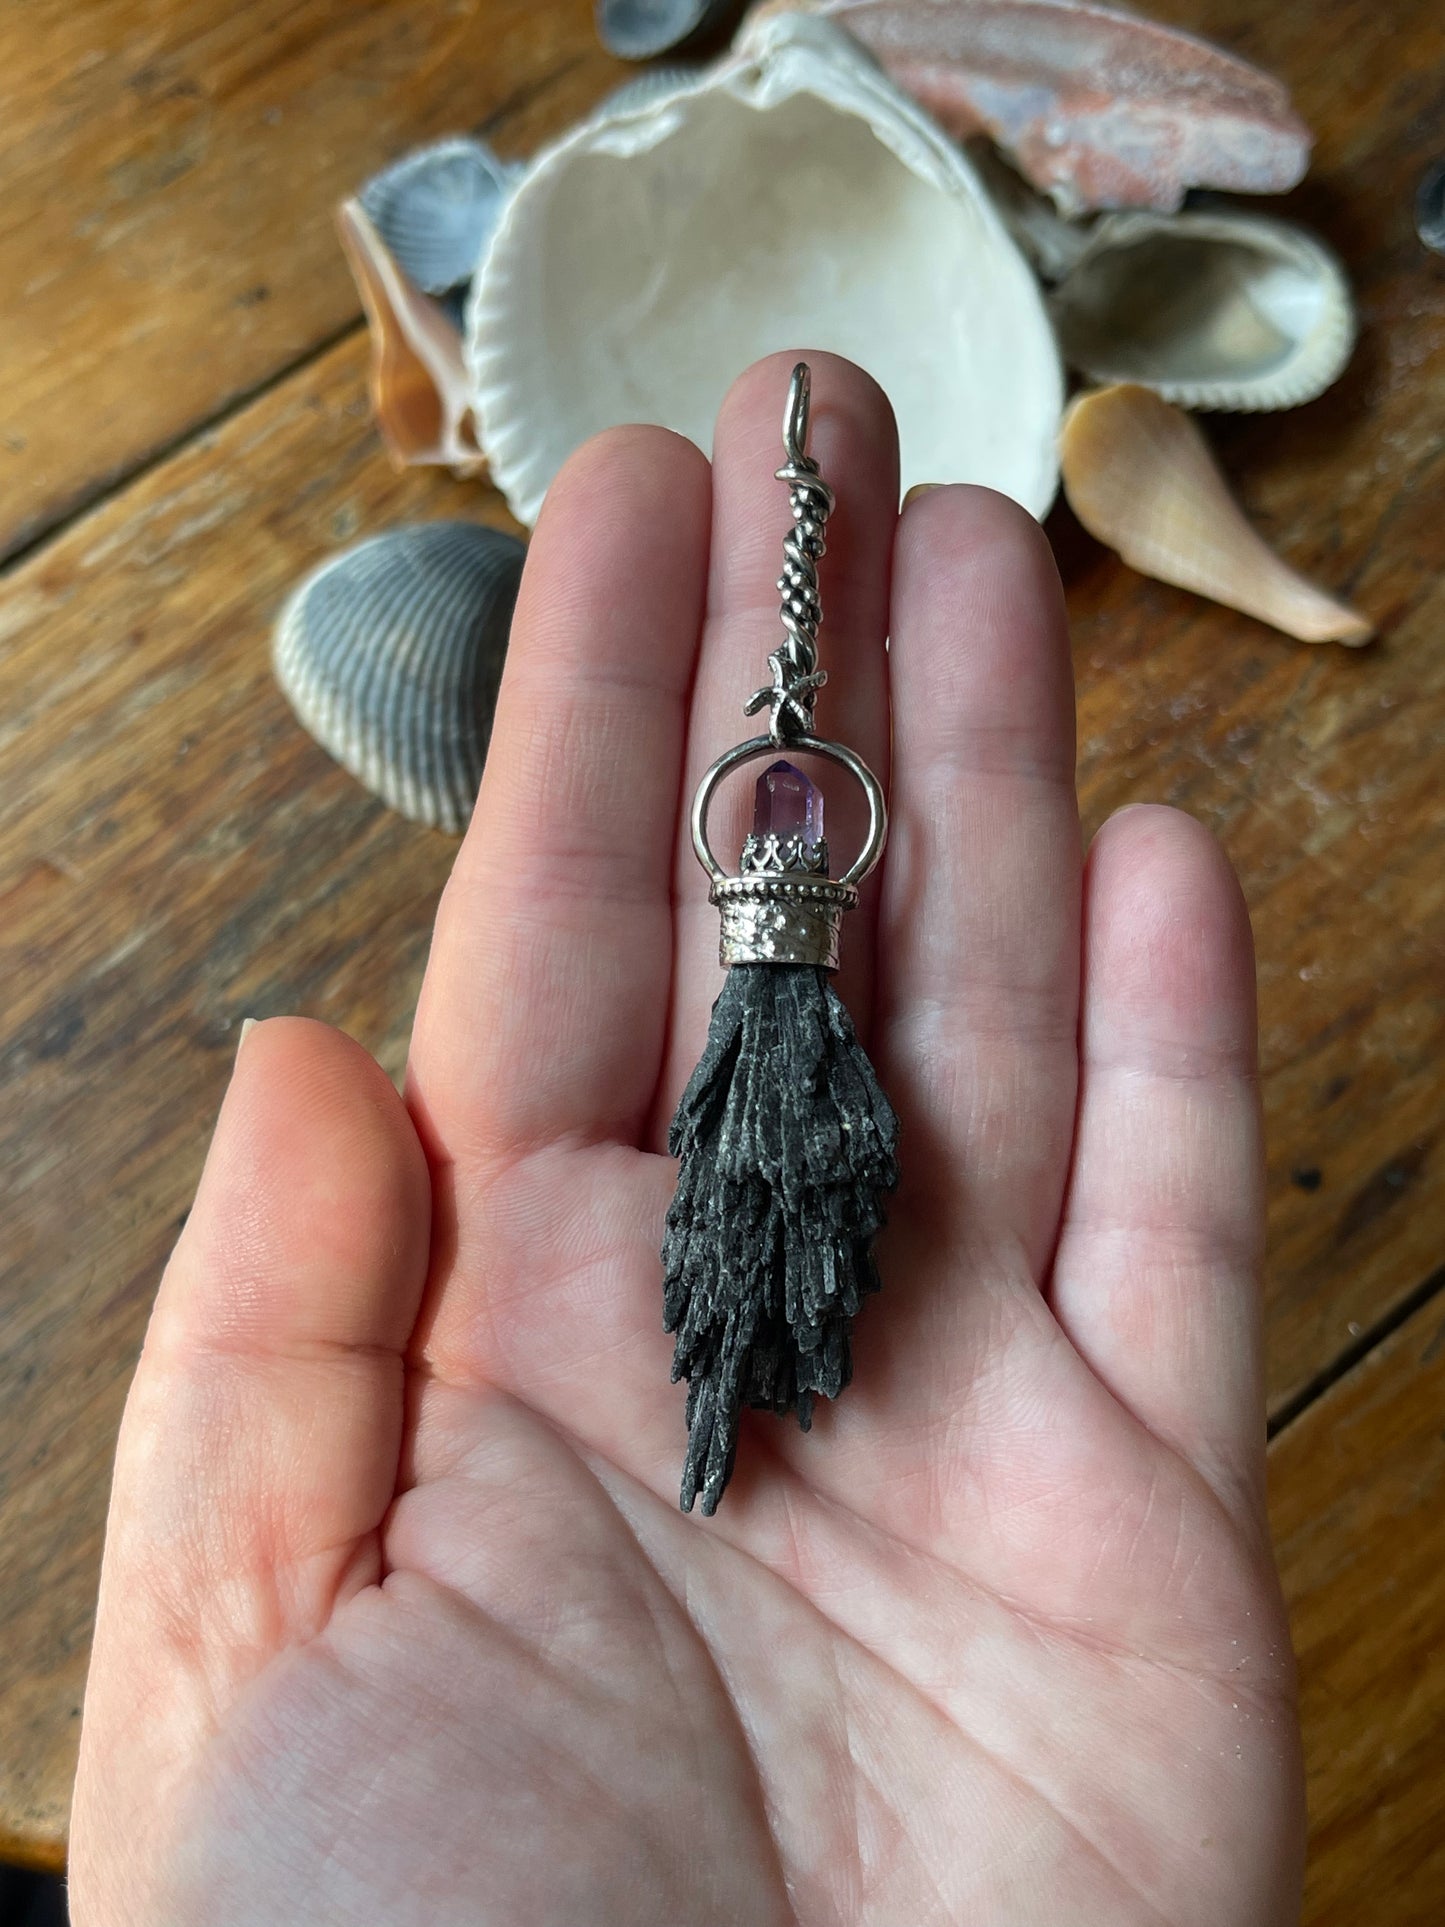 The Urchin Witch Crystal Broom Pendant